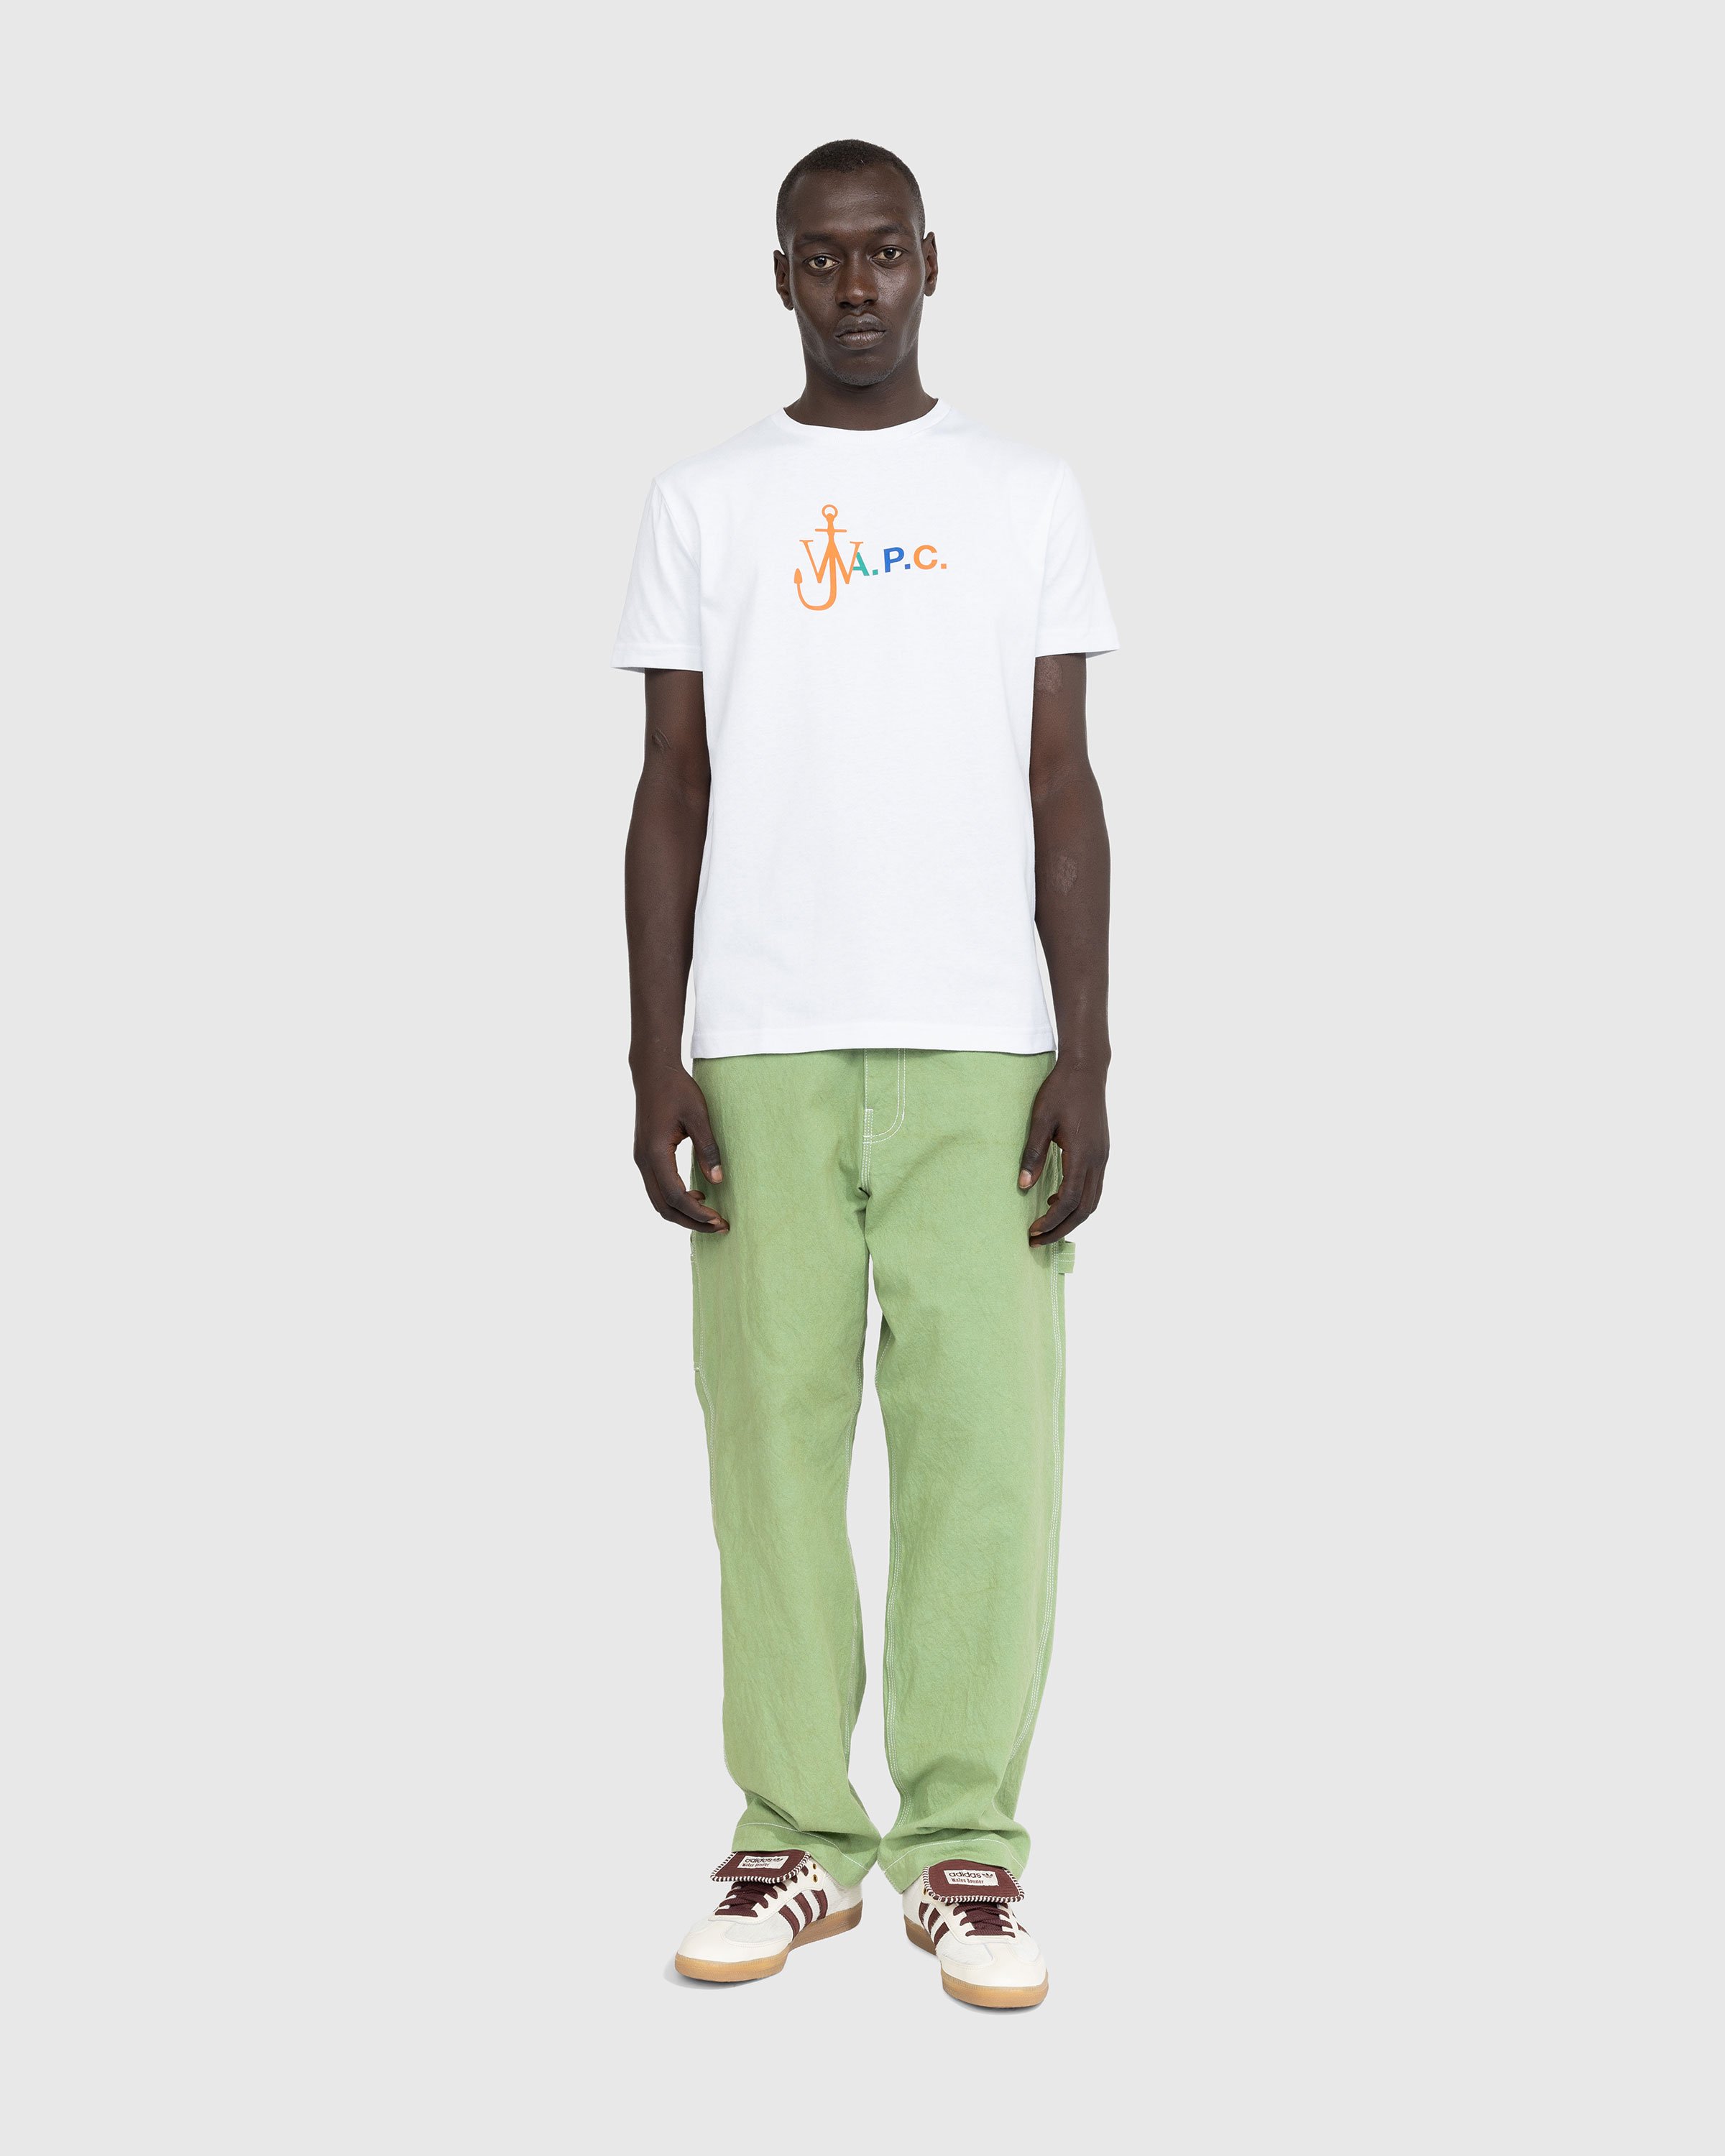 A.P.C. x J.W. Anderson - Anchor T-Shirt White - Clothing - White - Image 4